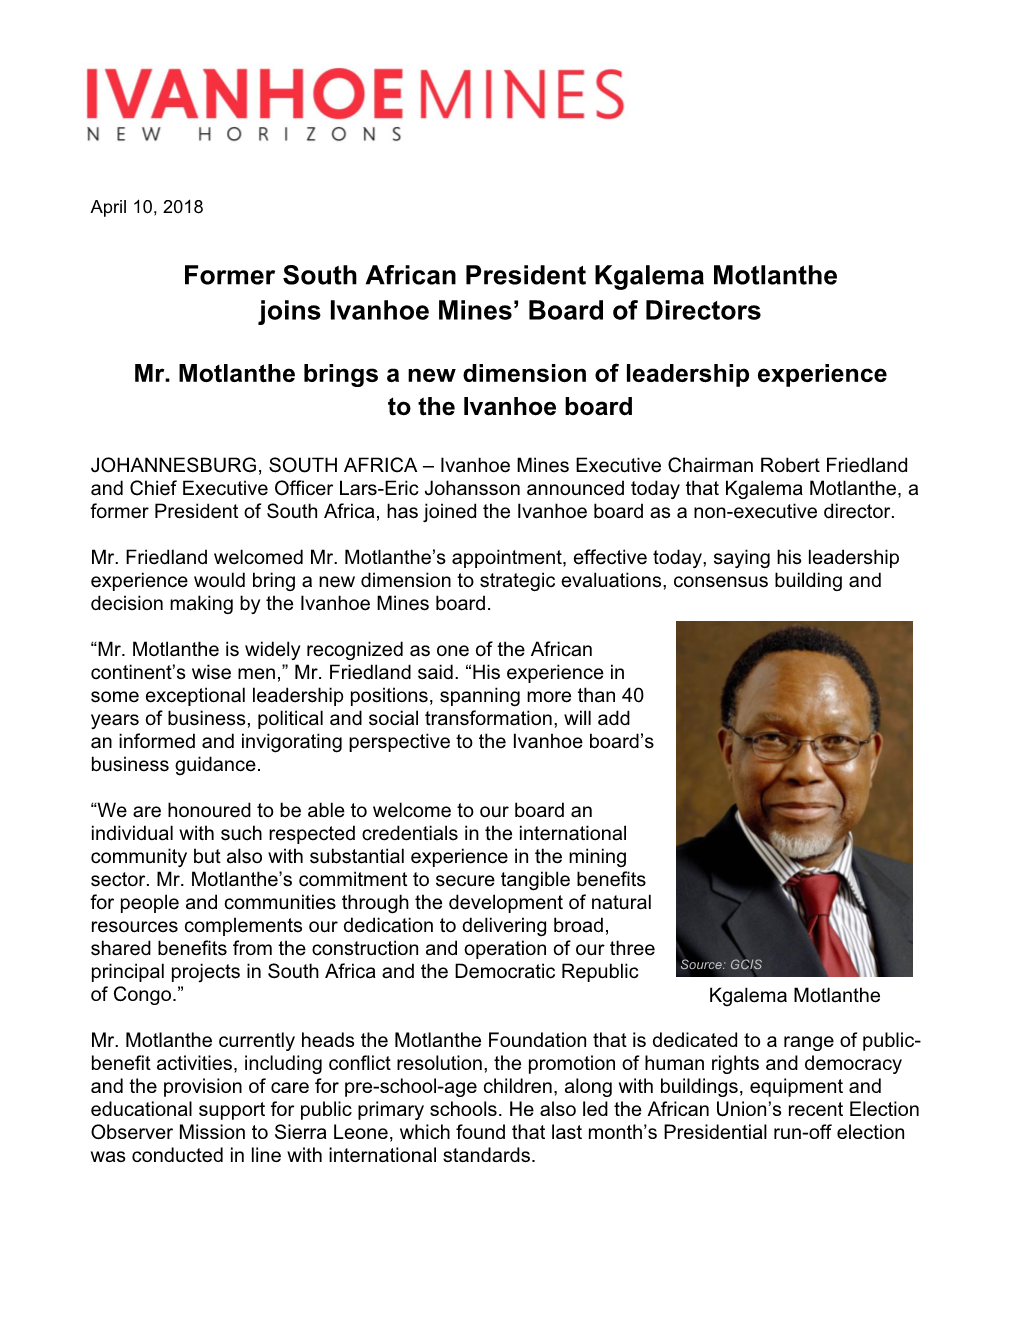 Former South African President Kgalema Motlanthe Joins Ivanhoe Mines’ Board of Directors